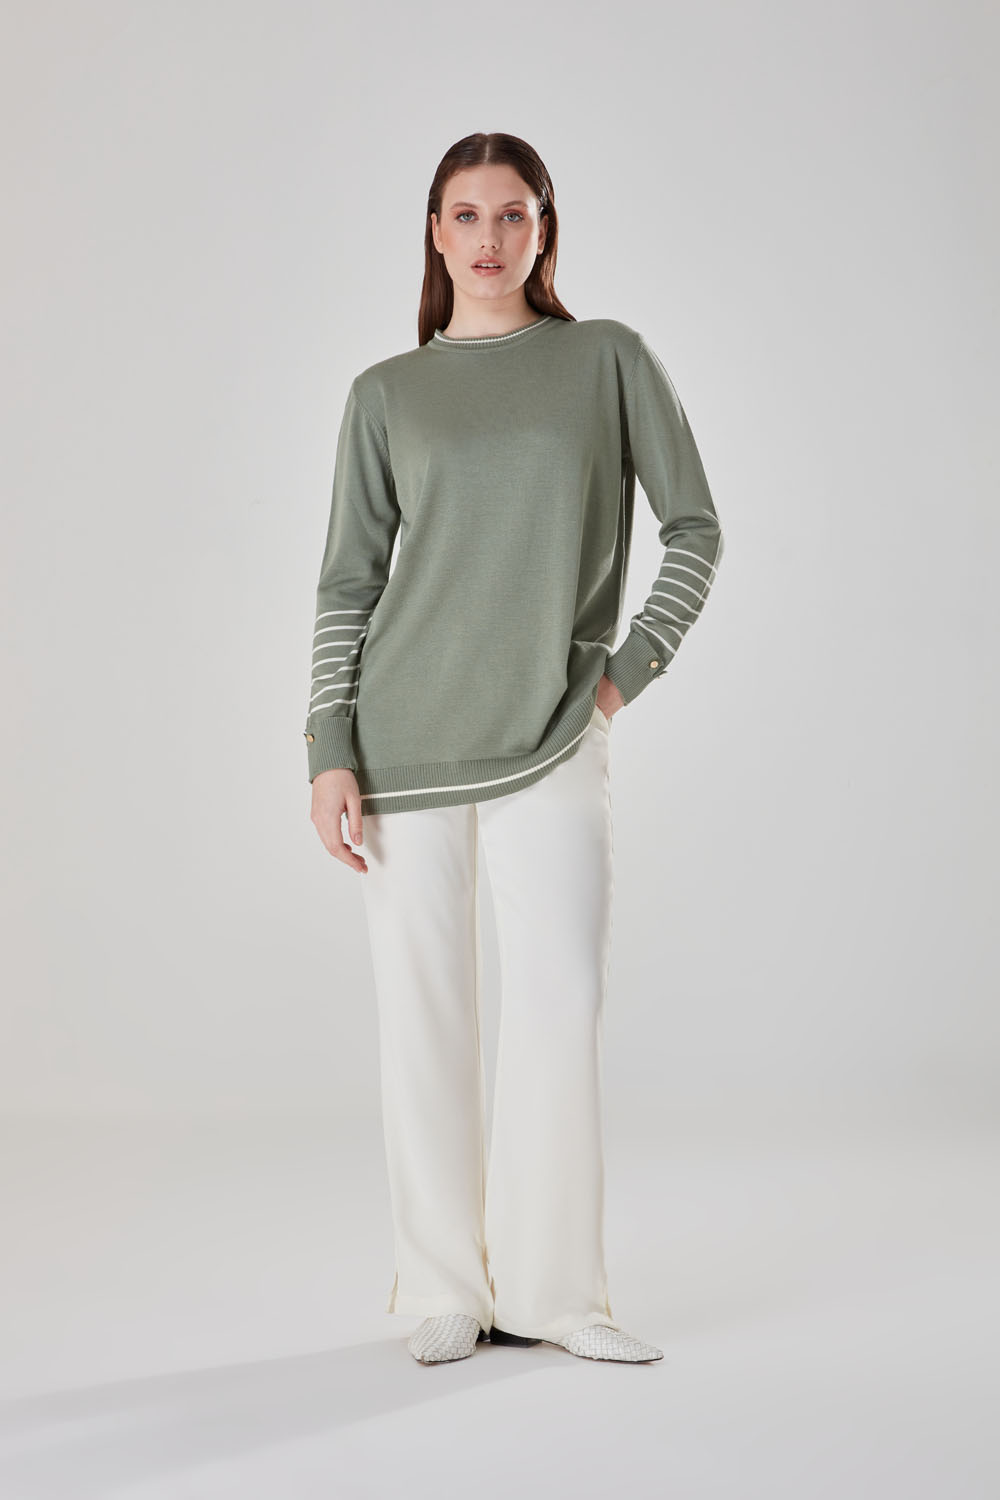 Mint Knitwear Tunic with Stripe Sleeves Patterned